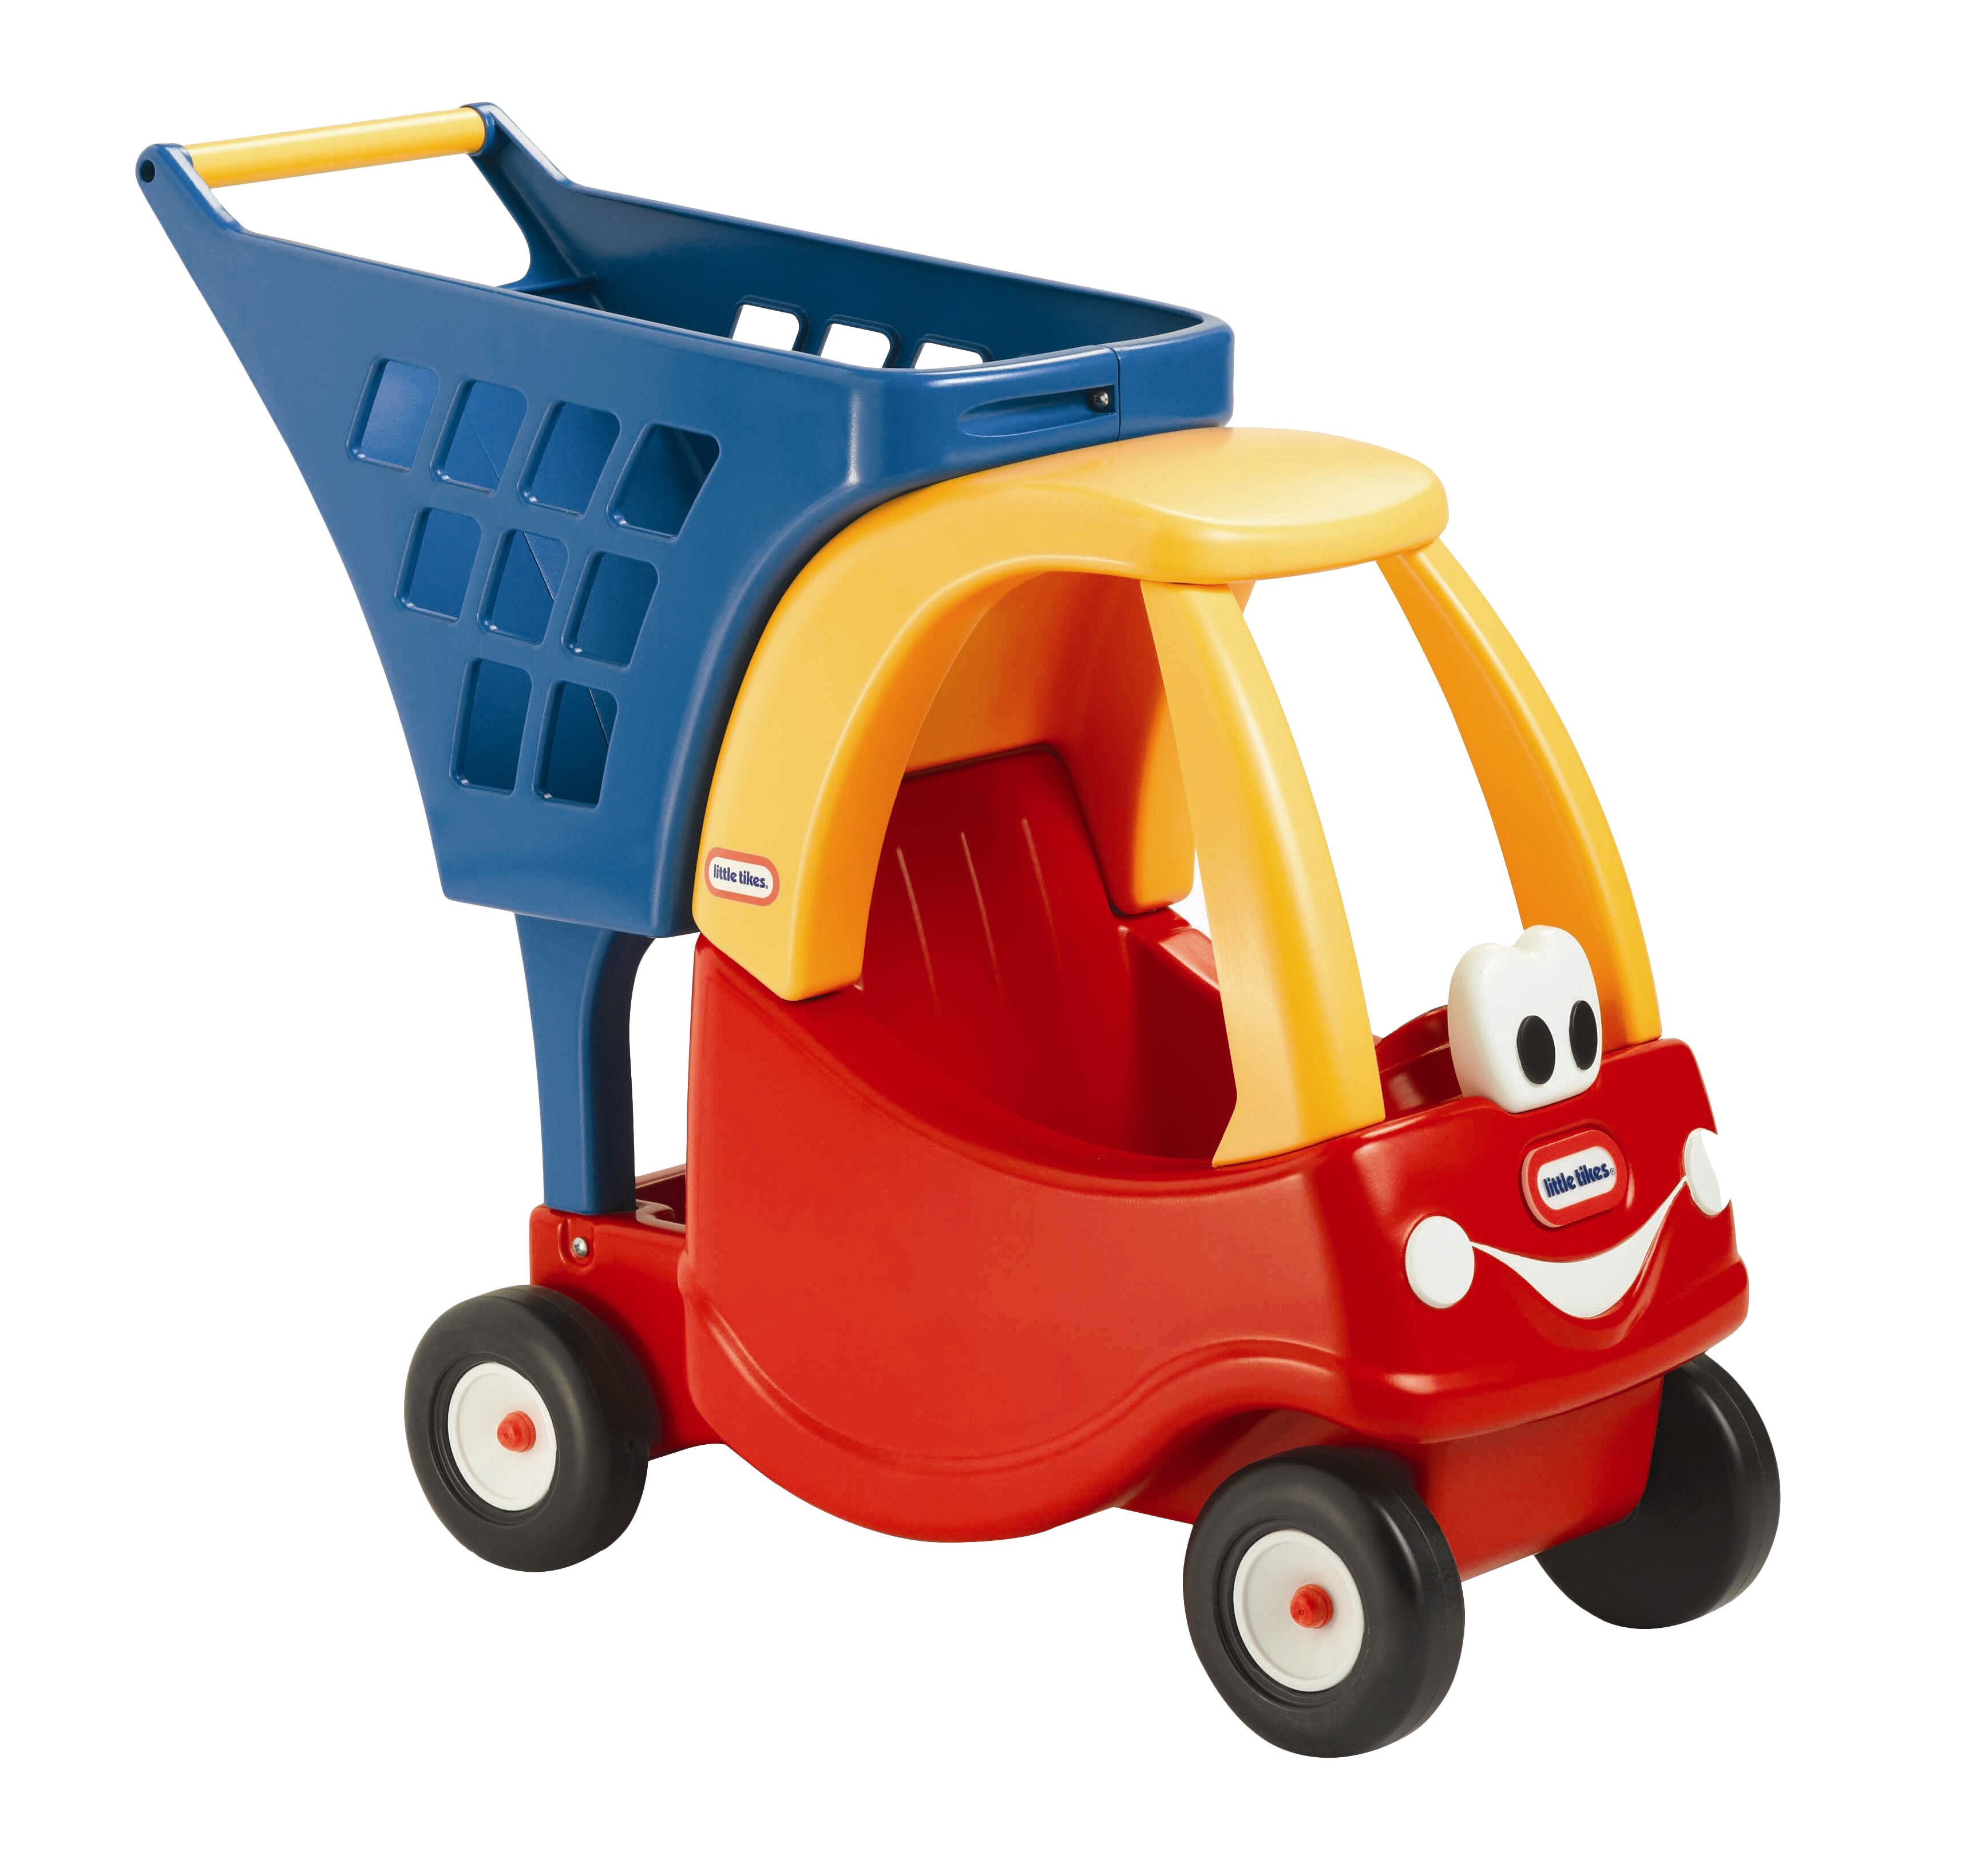 cozy coupe 2 seater